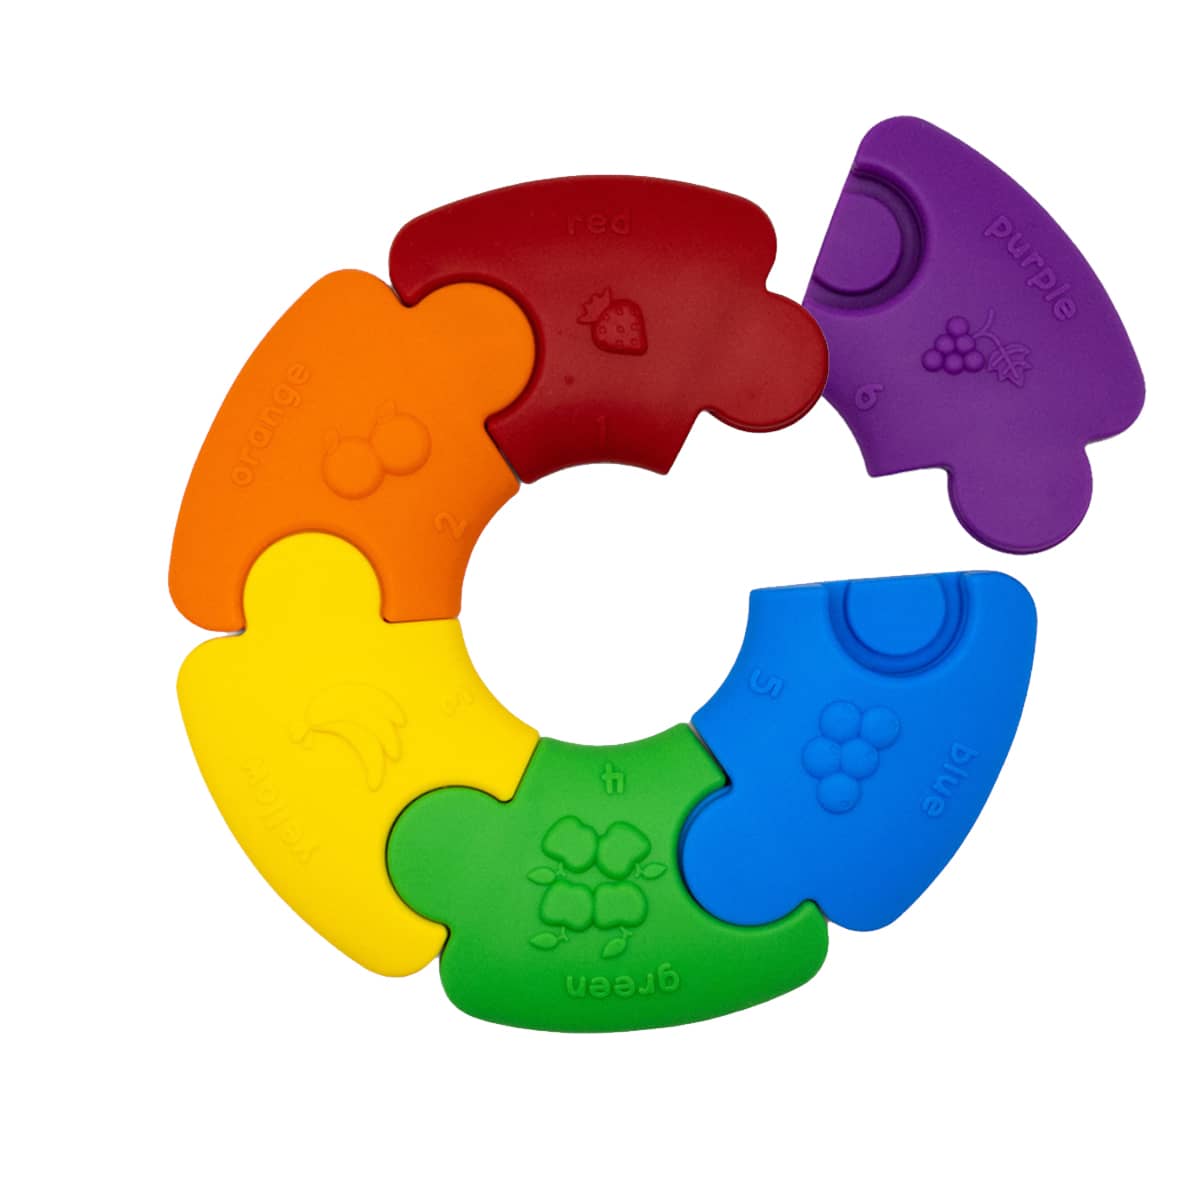 Jellystone Designs Colour Wheel Teether and Toy - Bright